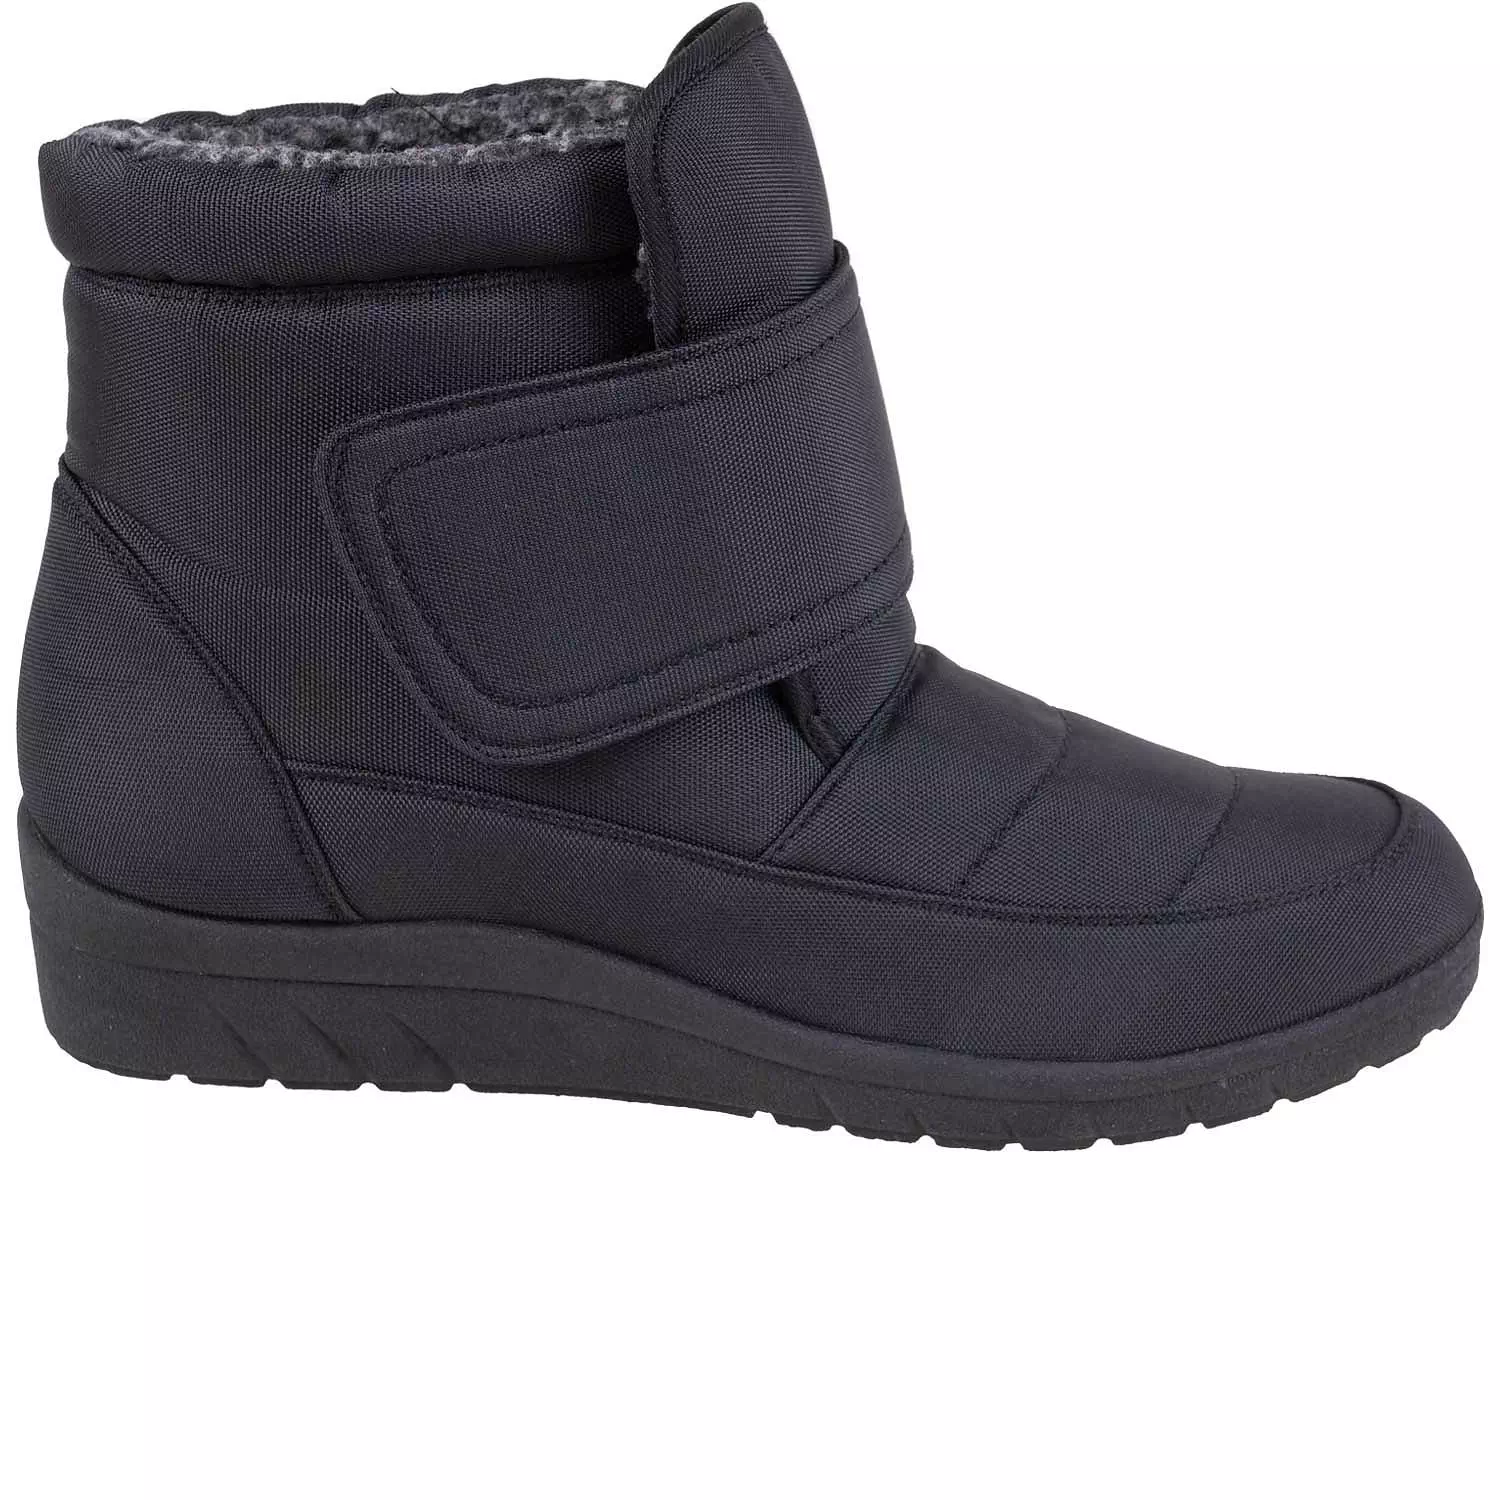 Women's canvas winter ankle boots with velcro strap, black, size 8